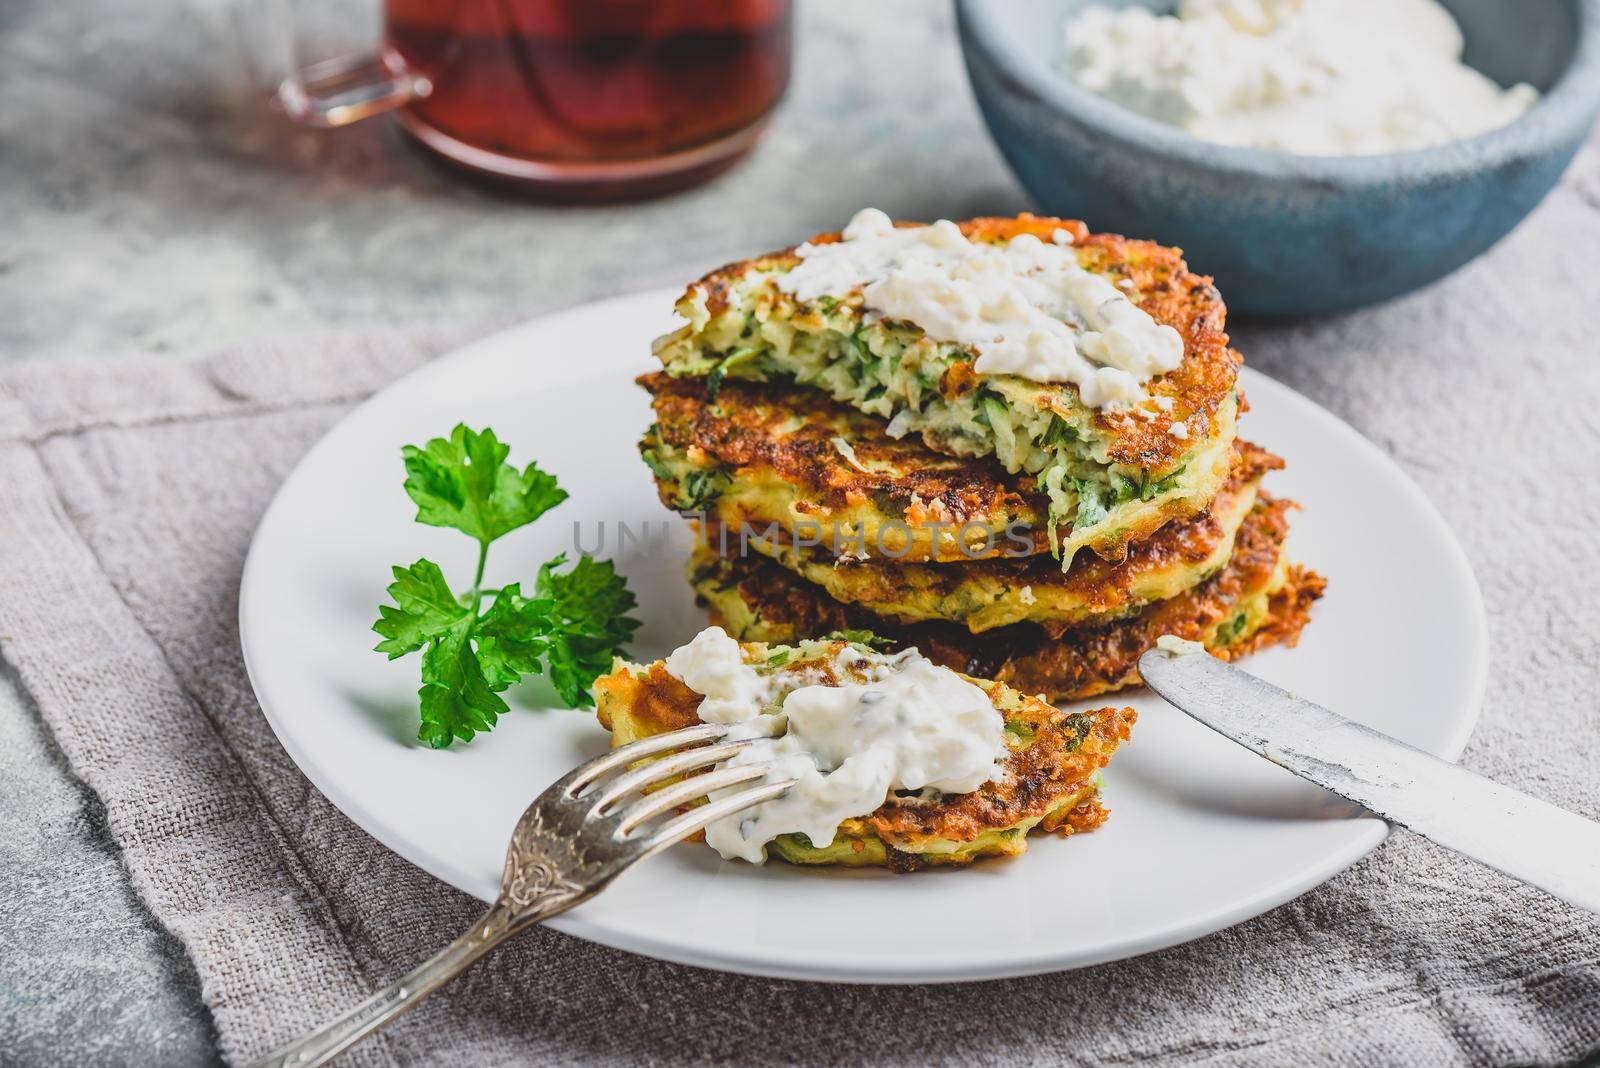 Zucchini parmesan pancakes with dip and parsley